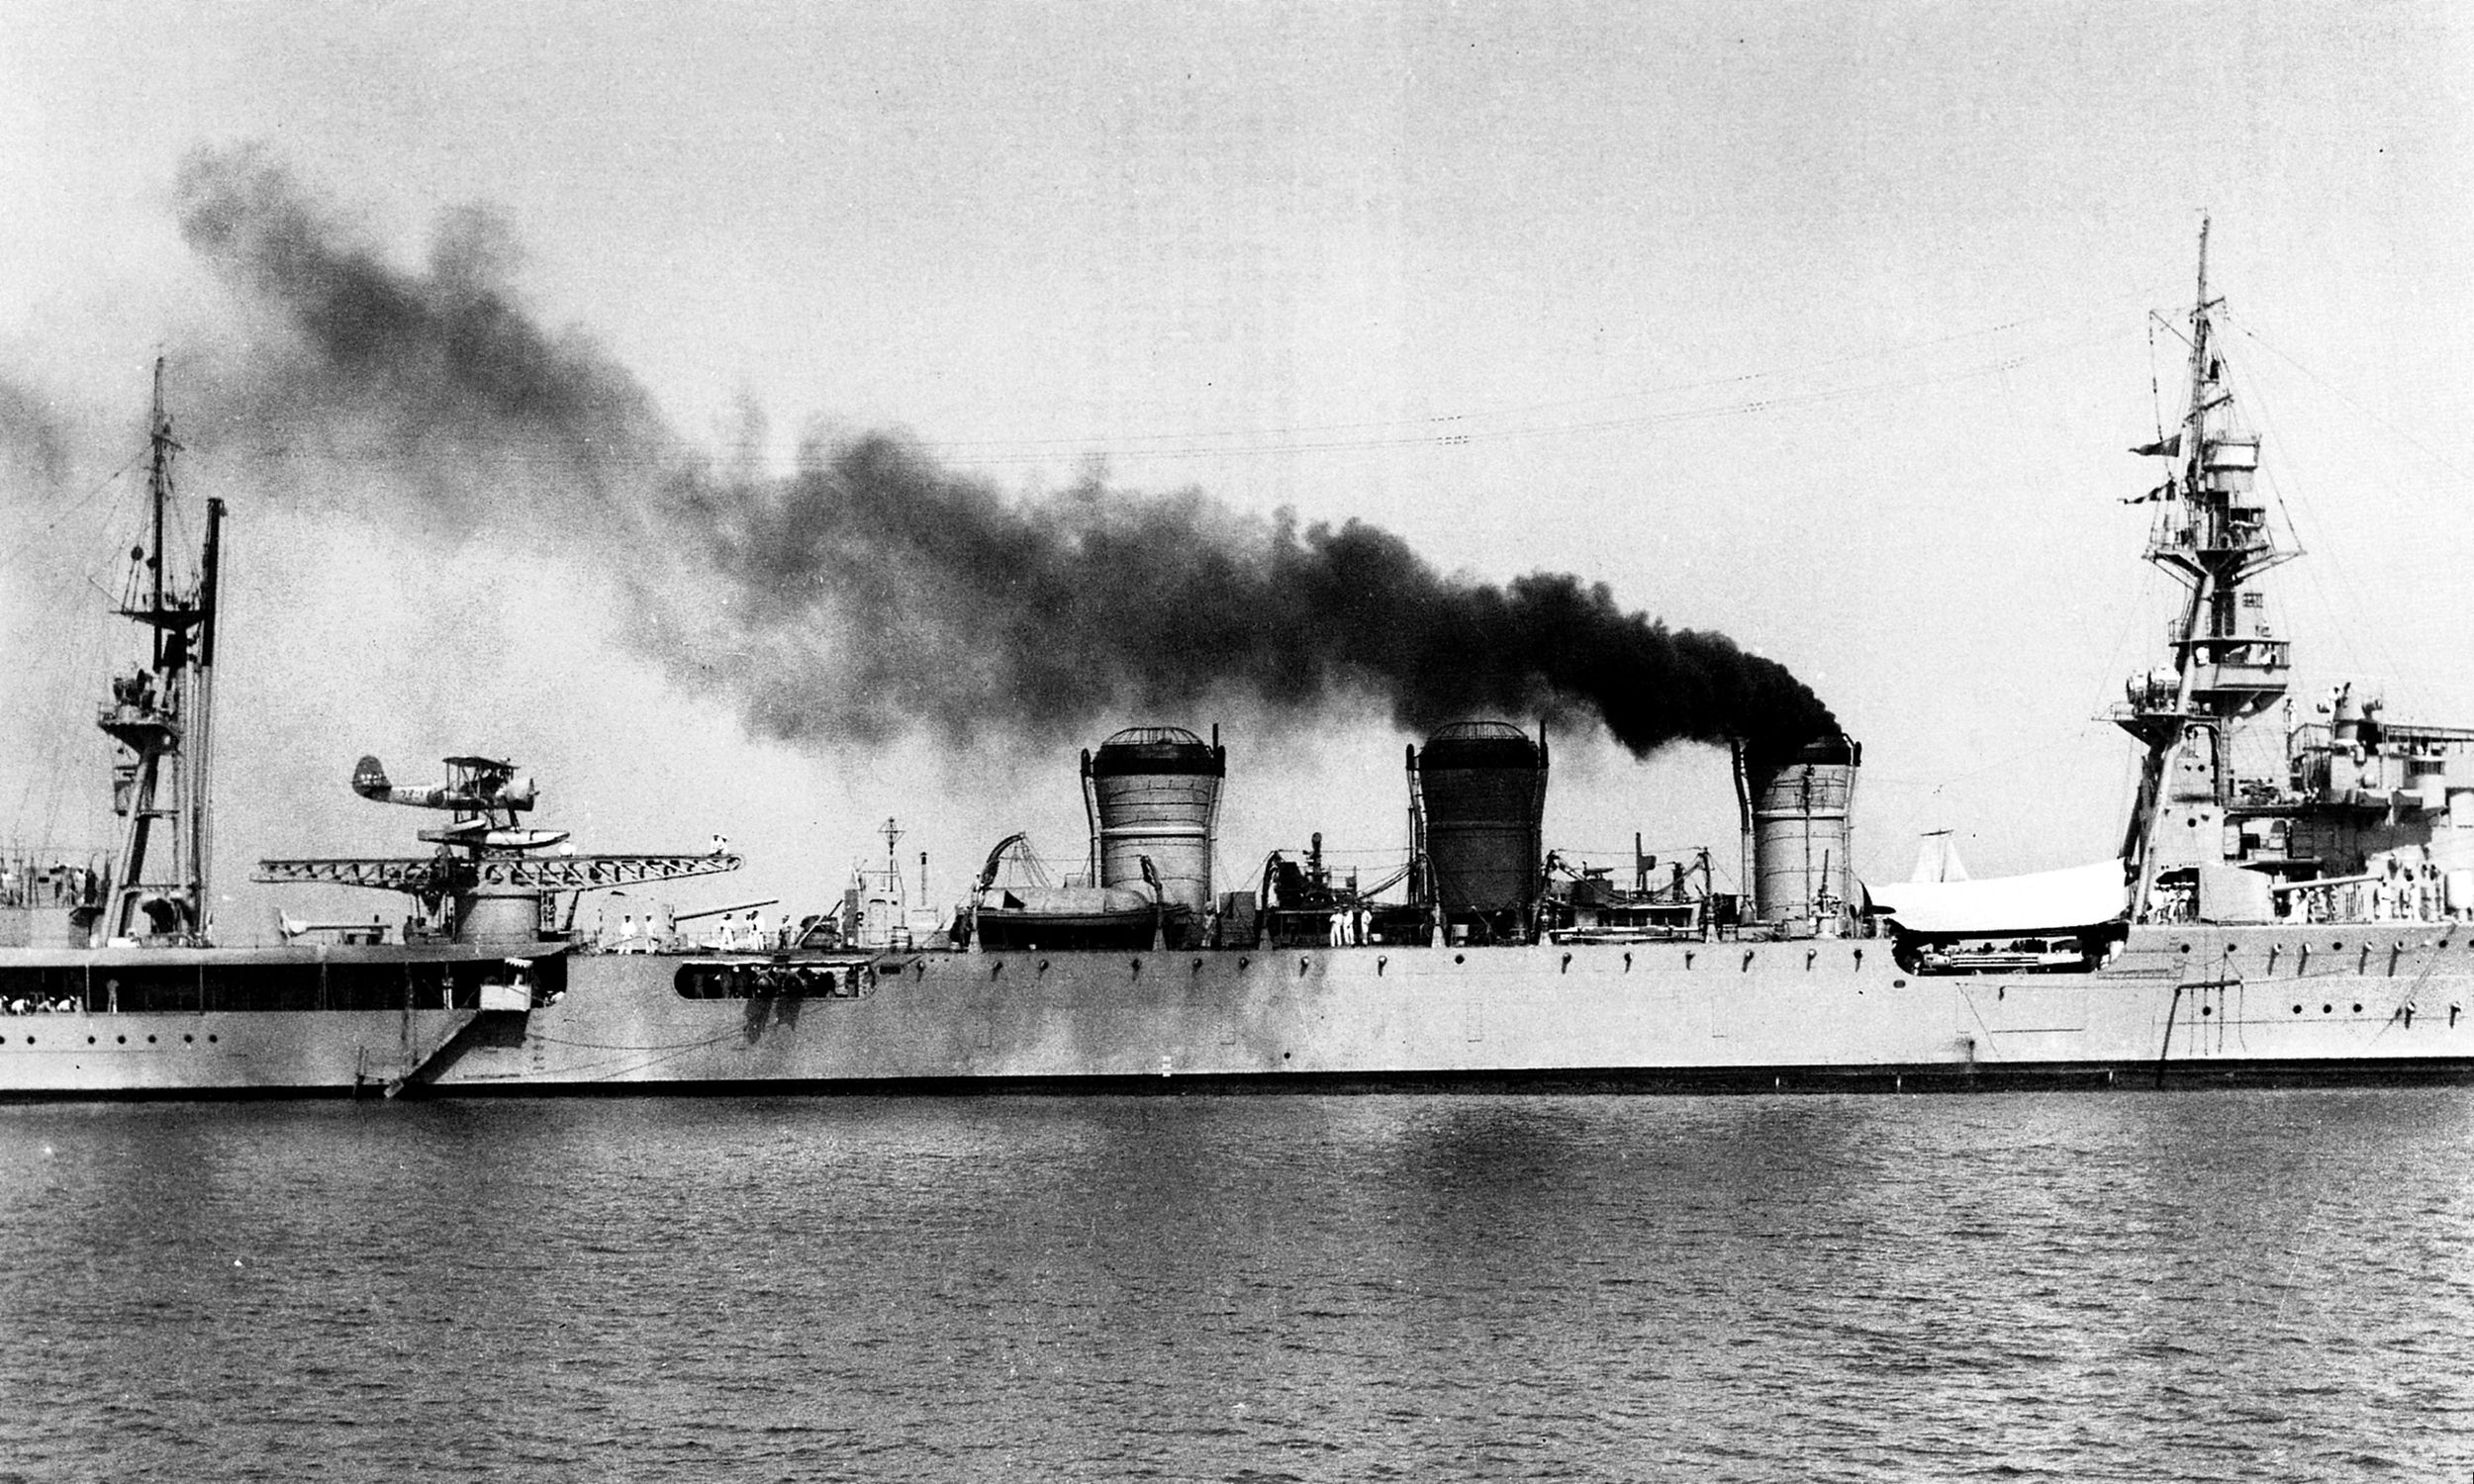 The Japanese cruiser Kuma, shown here off the coast of Tsingtao, China, in 1935. On April 9, 1942, PT-34 and PT-41 ambushed the Kuma in the Tañon Strait between the islands of Negros and Cebu, hitting it with a torpedo that caused significant damage. Note the Mitsubishi F1M2 Pete floatplane on the Kuma’s catapult.